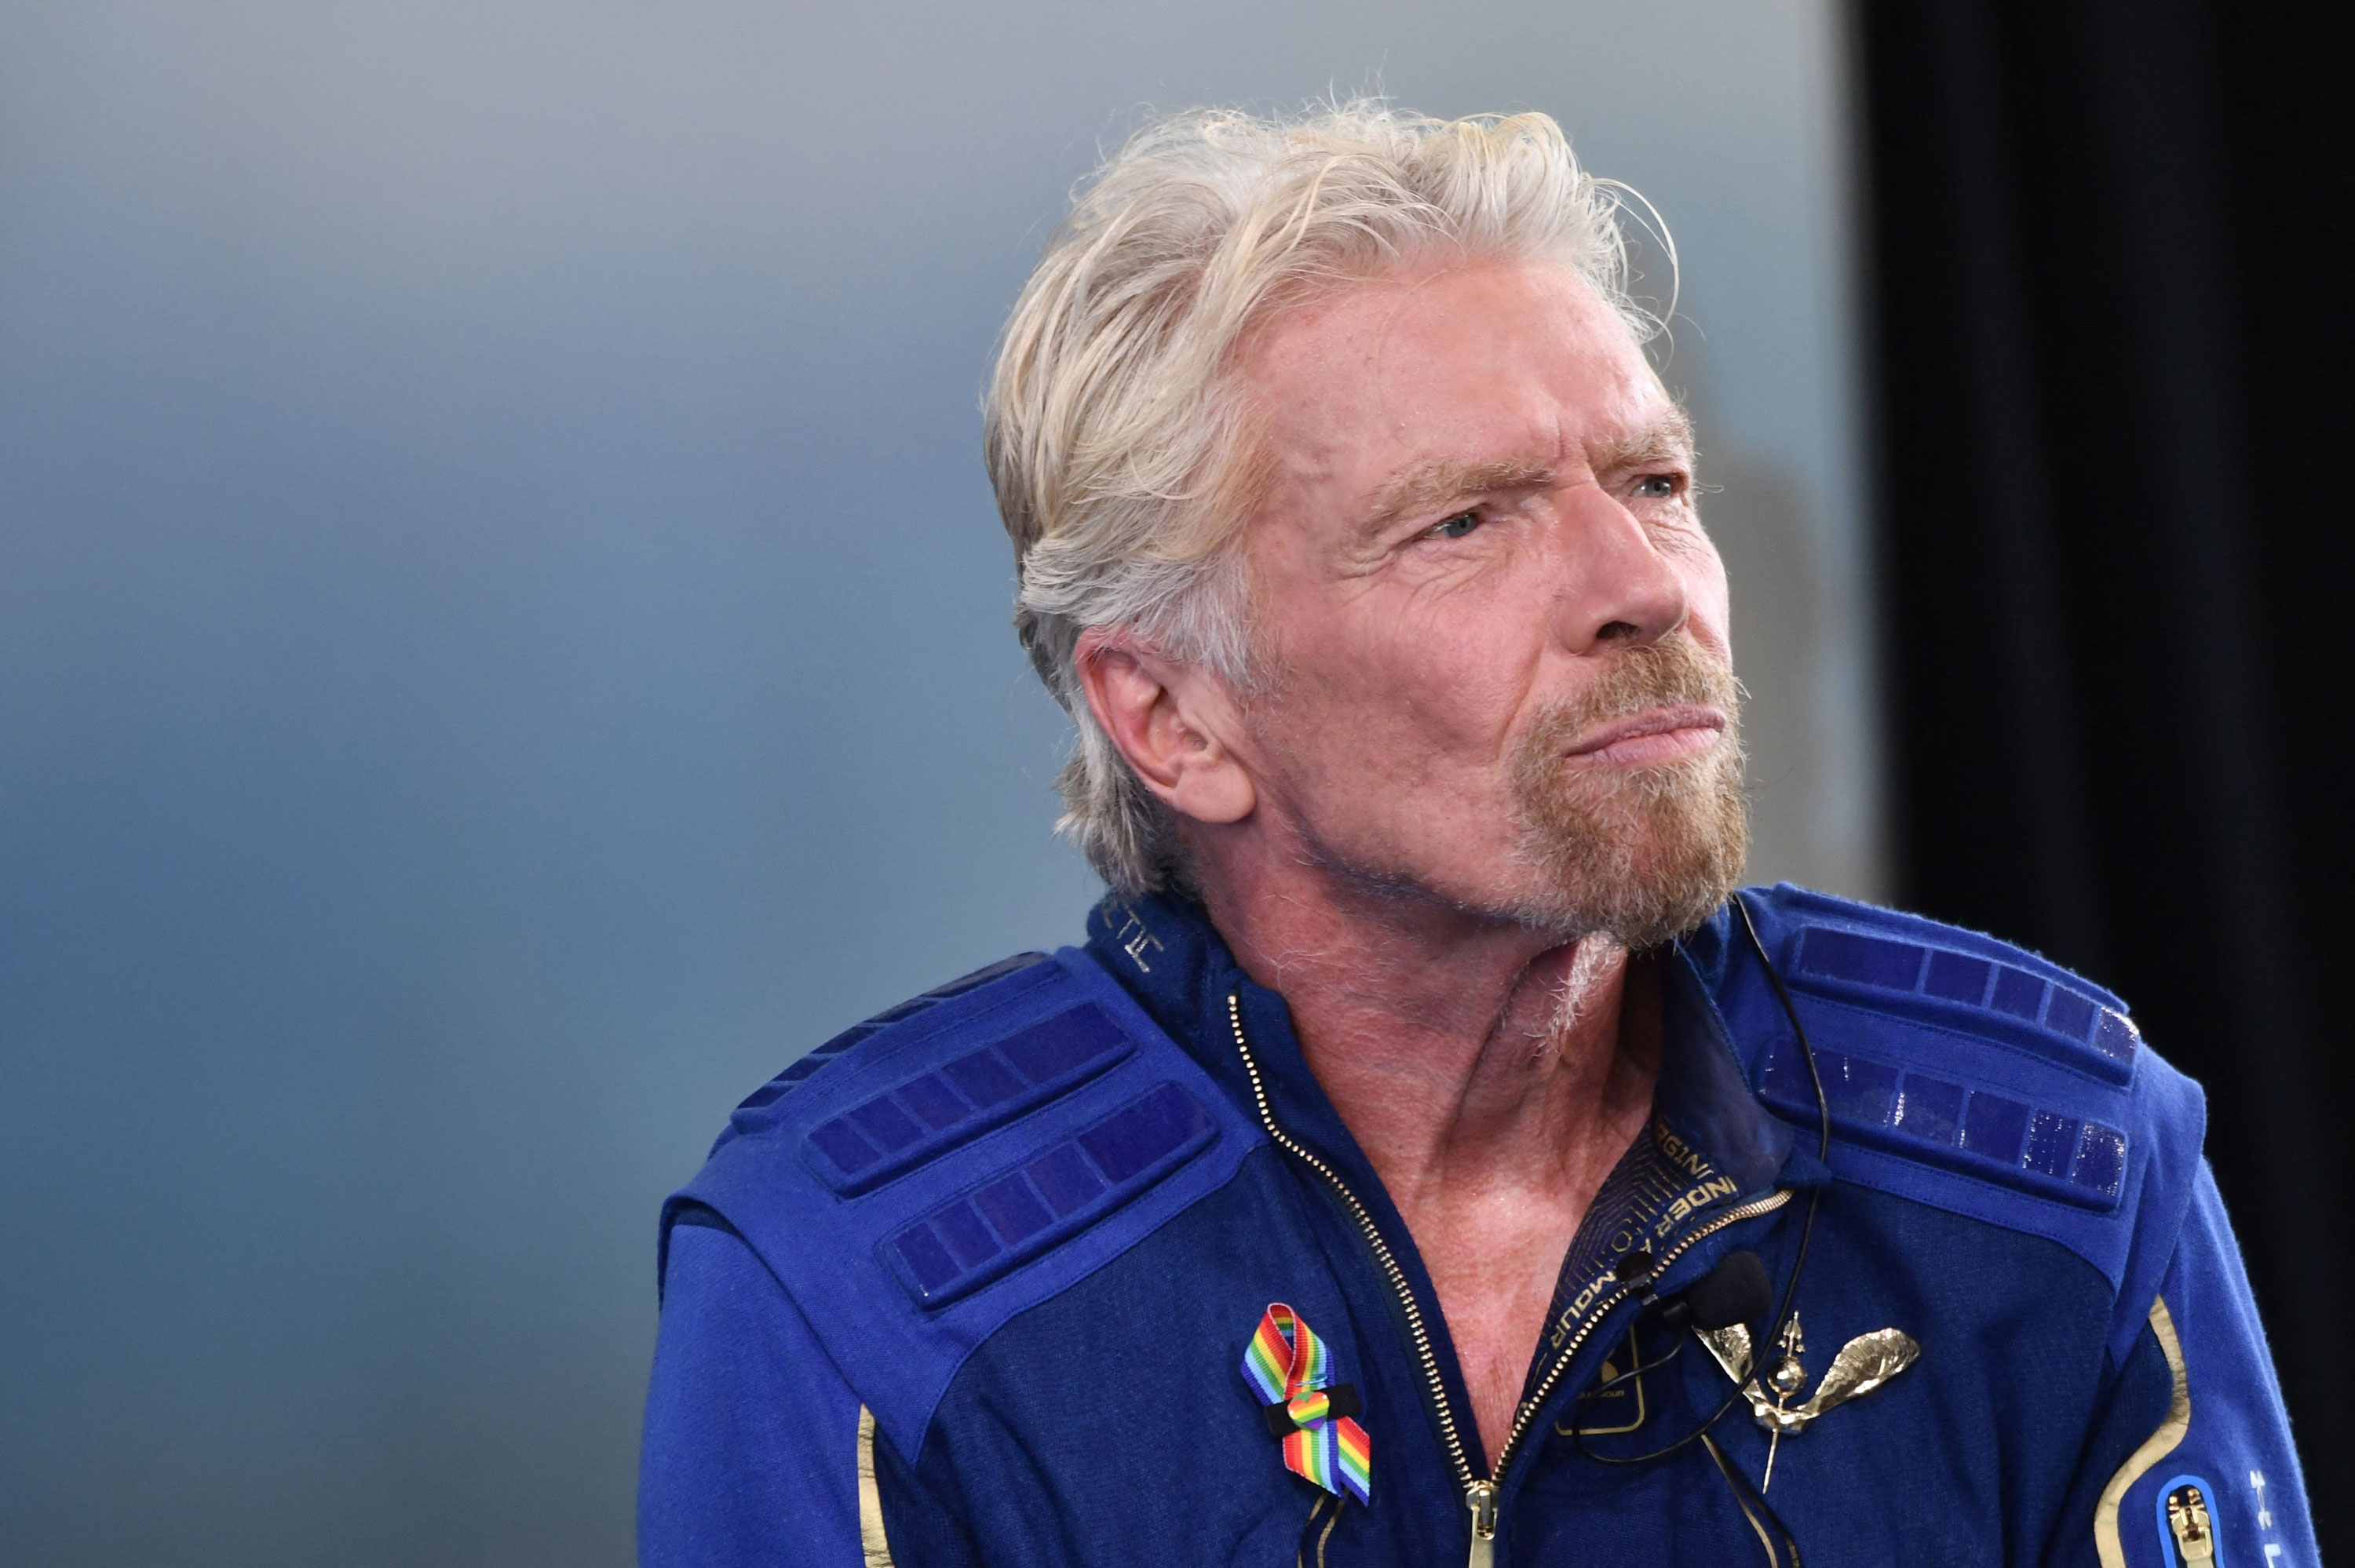 Richard Branson speaks after he flew into space aboard a Virgin Galactic vessel in New Mexico on July 11, 2021.